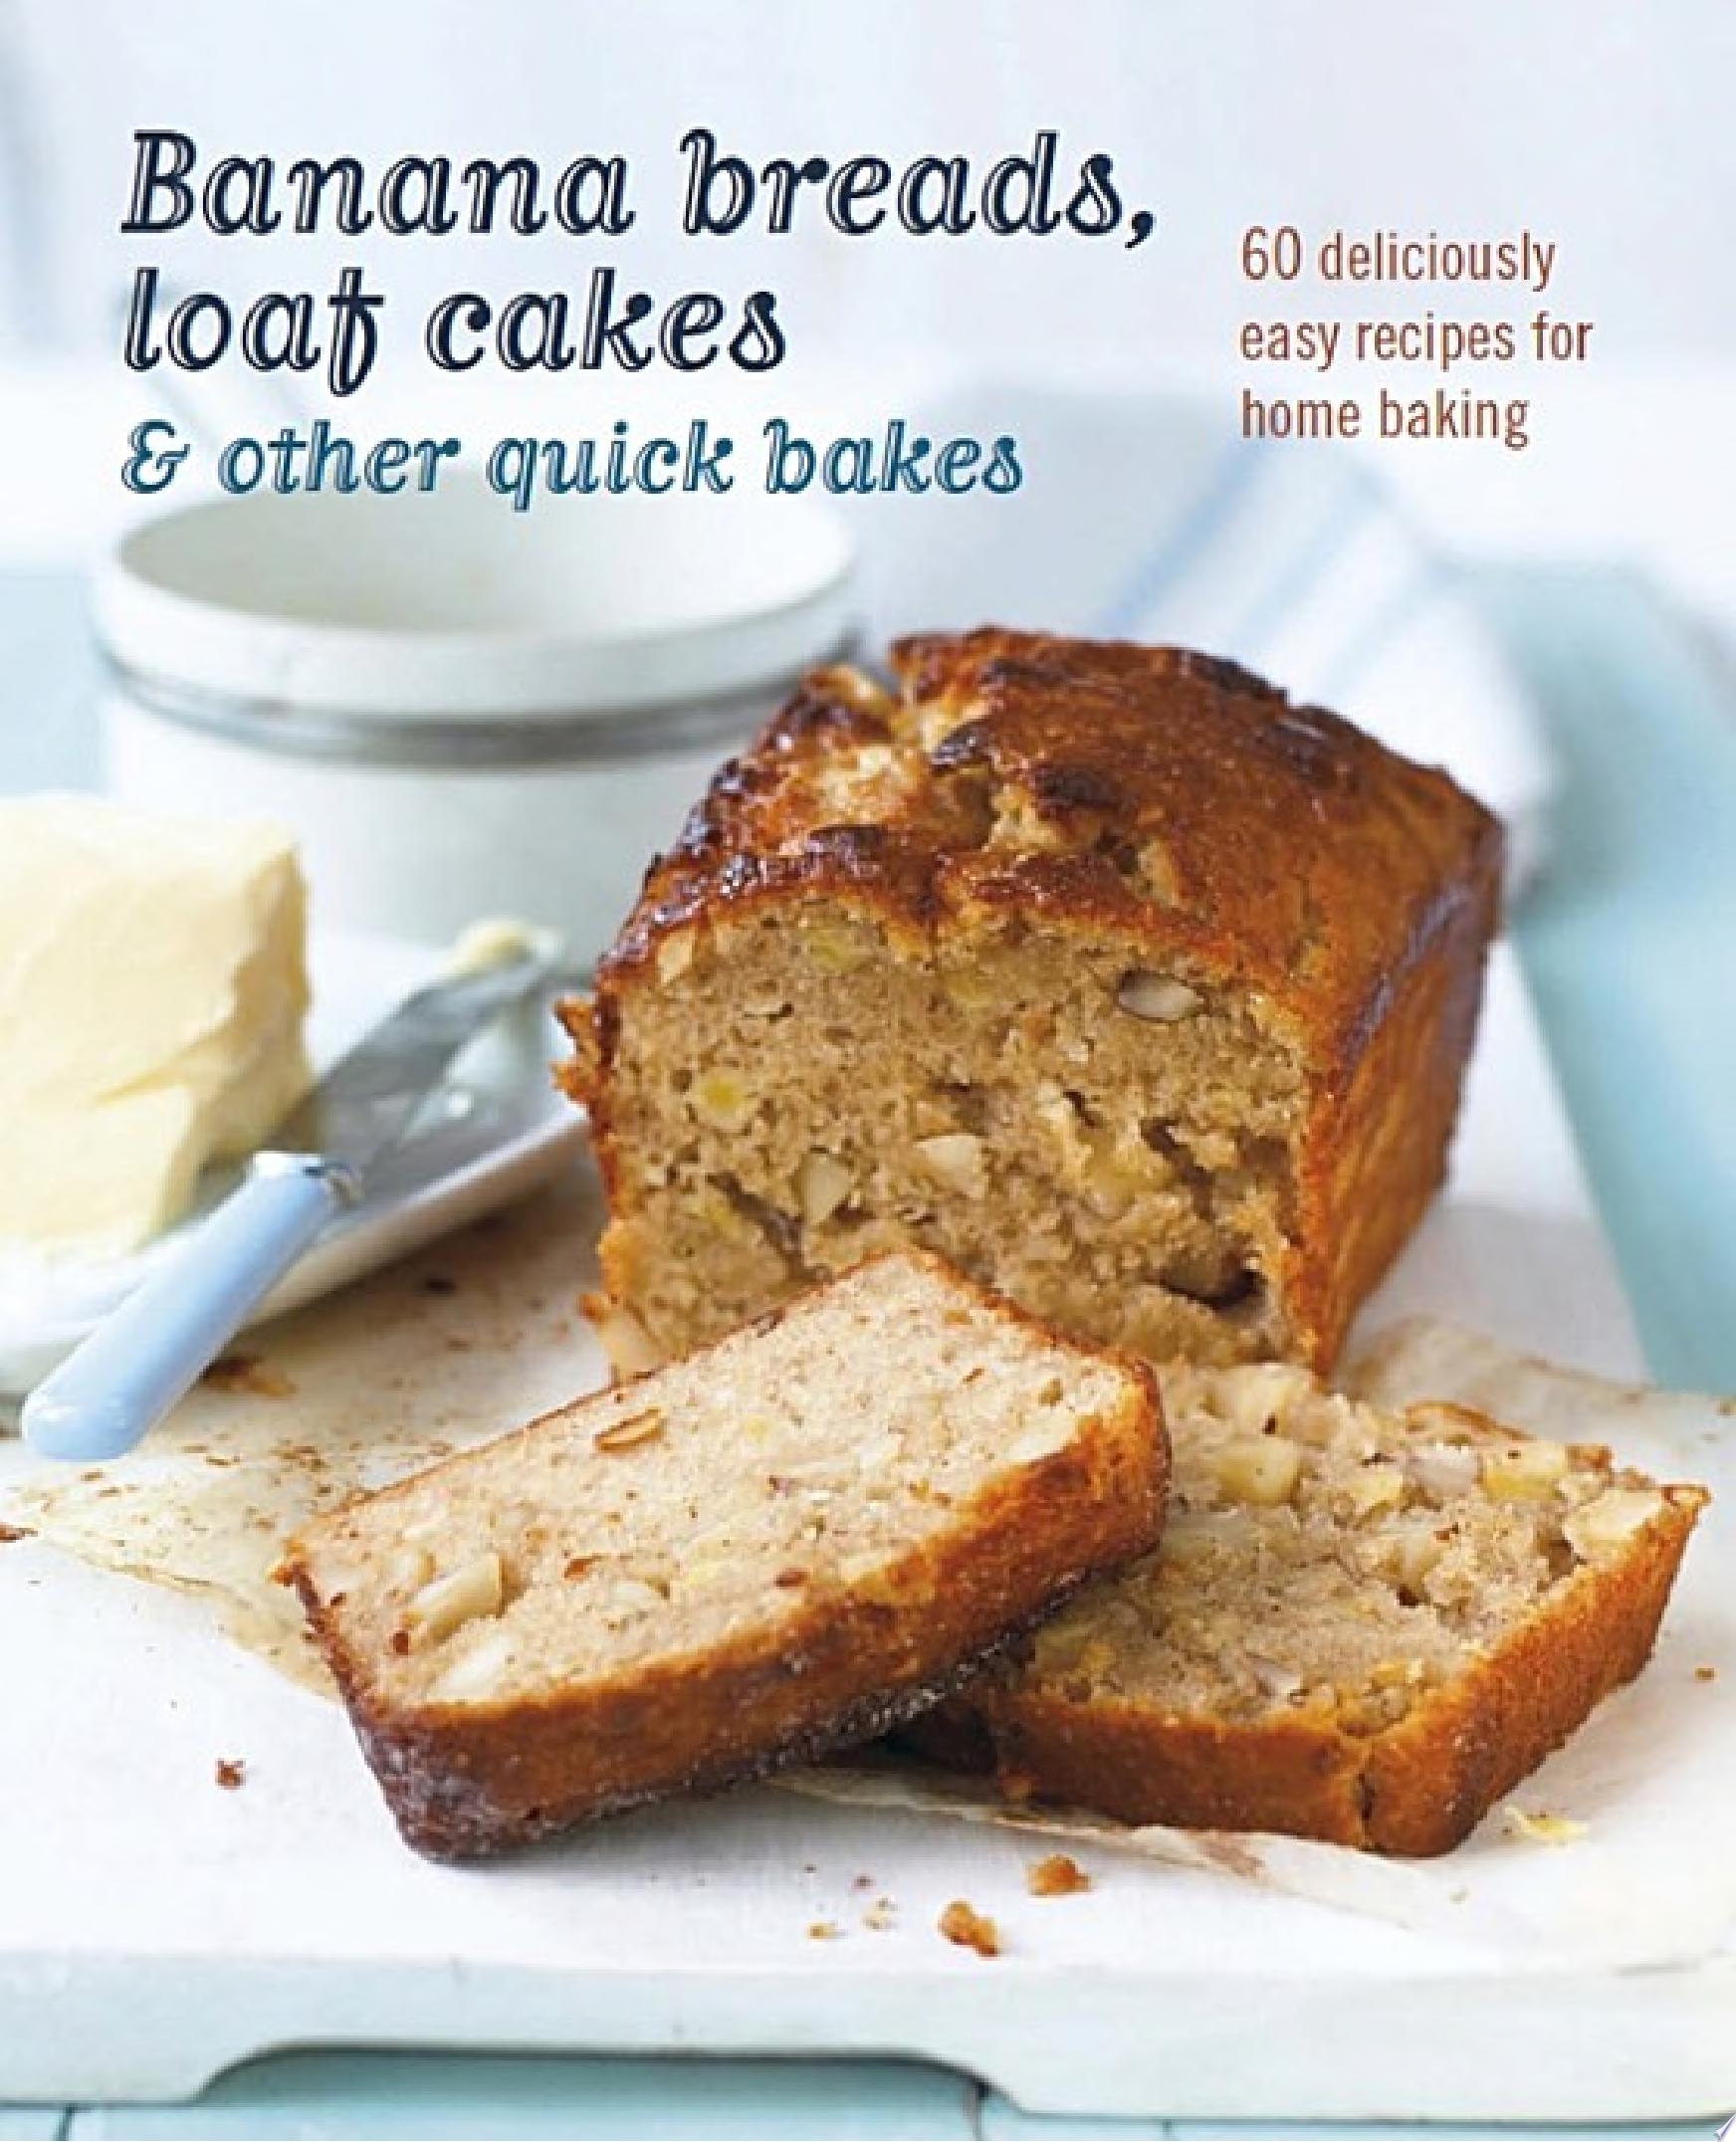 Image for "Banana breads, loaf cakes &amp; other quick bakes"